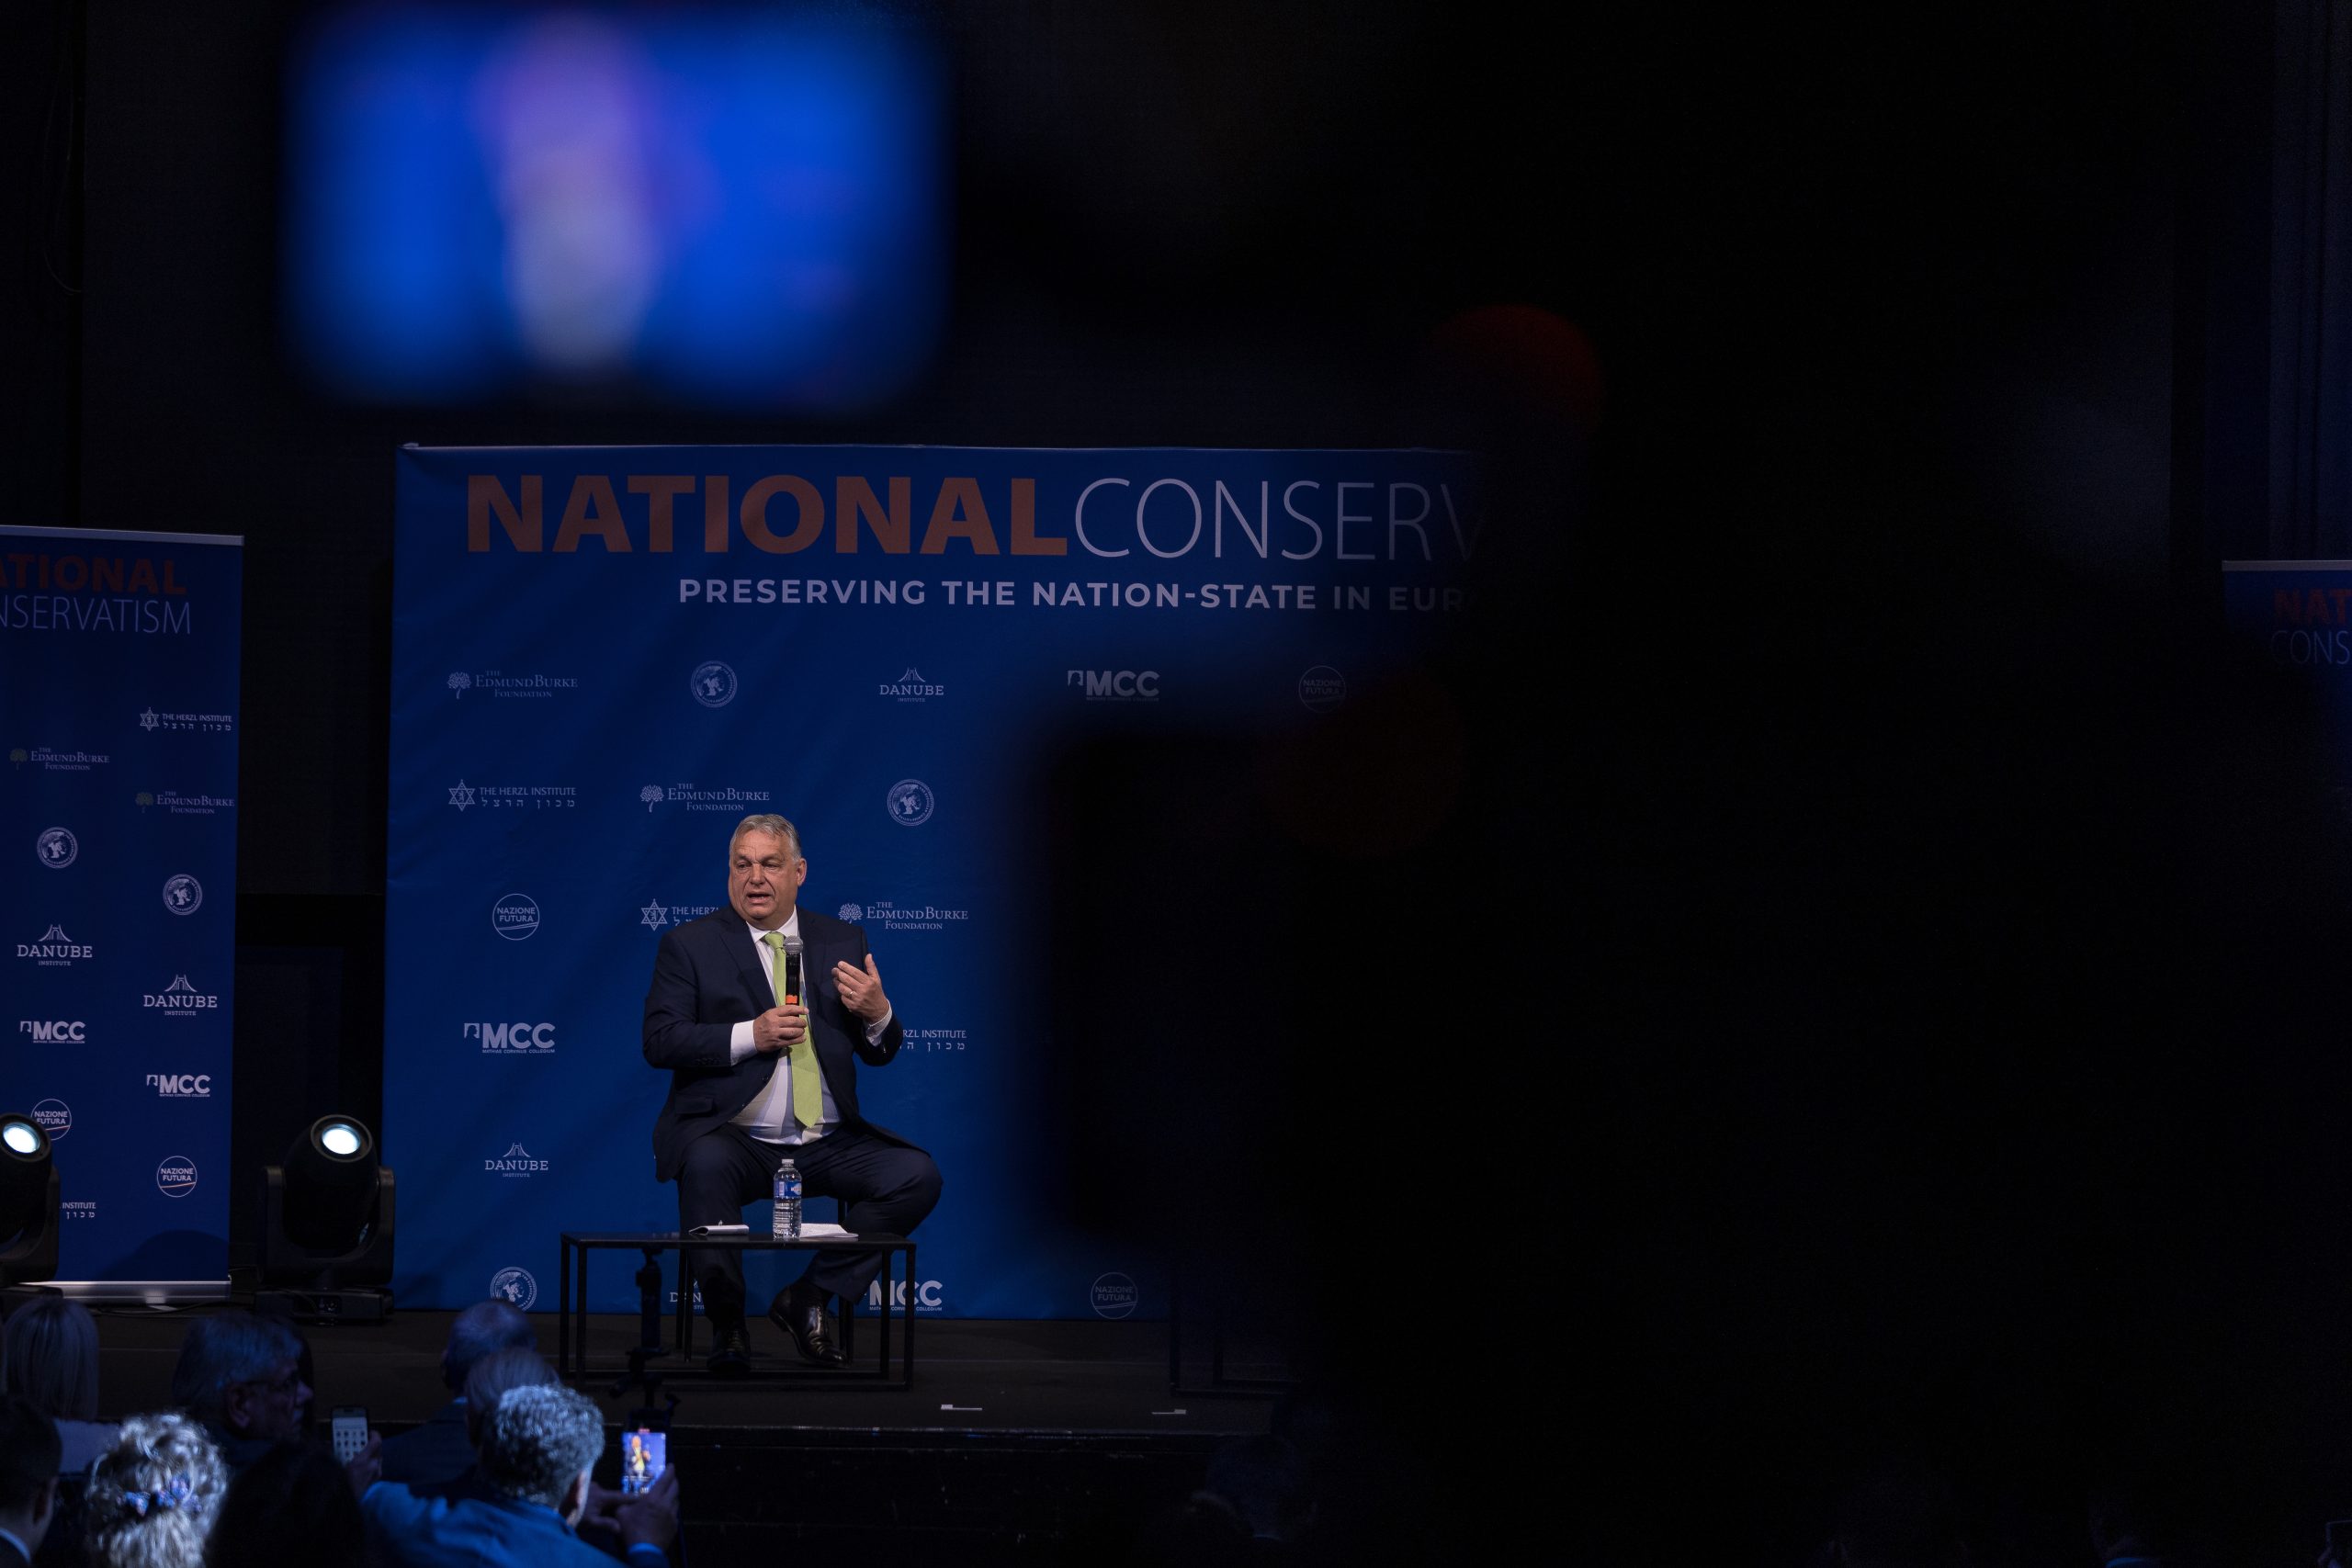 National Conservatism Event Resumes In Brussels After Cancellation Drama